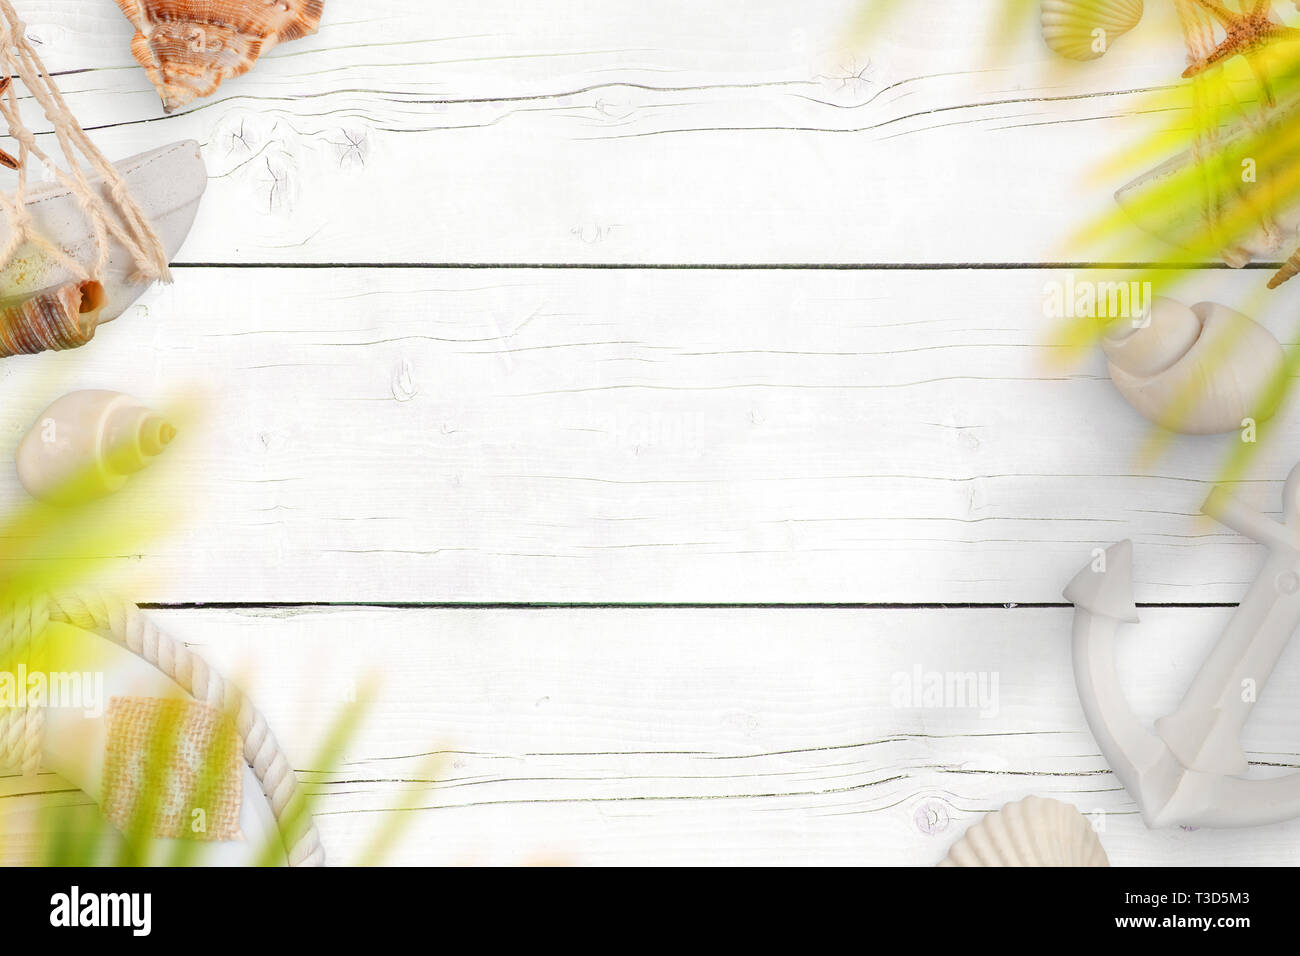 Summer travel background. White wooden desk with sea shells, boat anchor and life belt. Palm leaves above. Copy space in the middle. Stock Photo